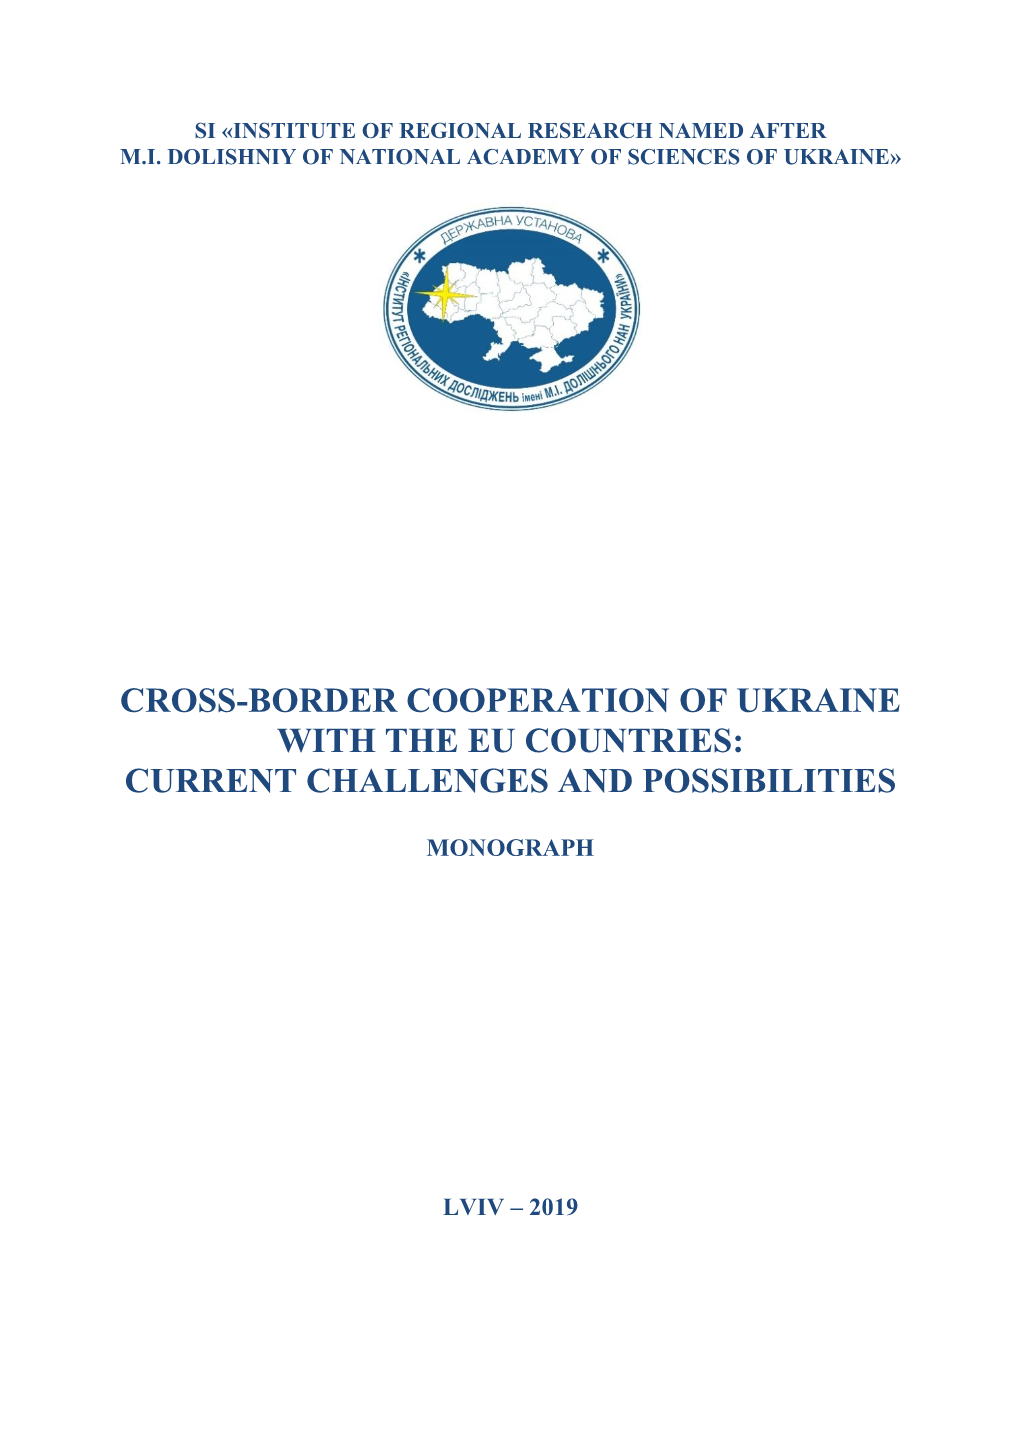 (2019). Cross-Border Cooperation of Ukraine with the EU Countries